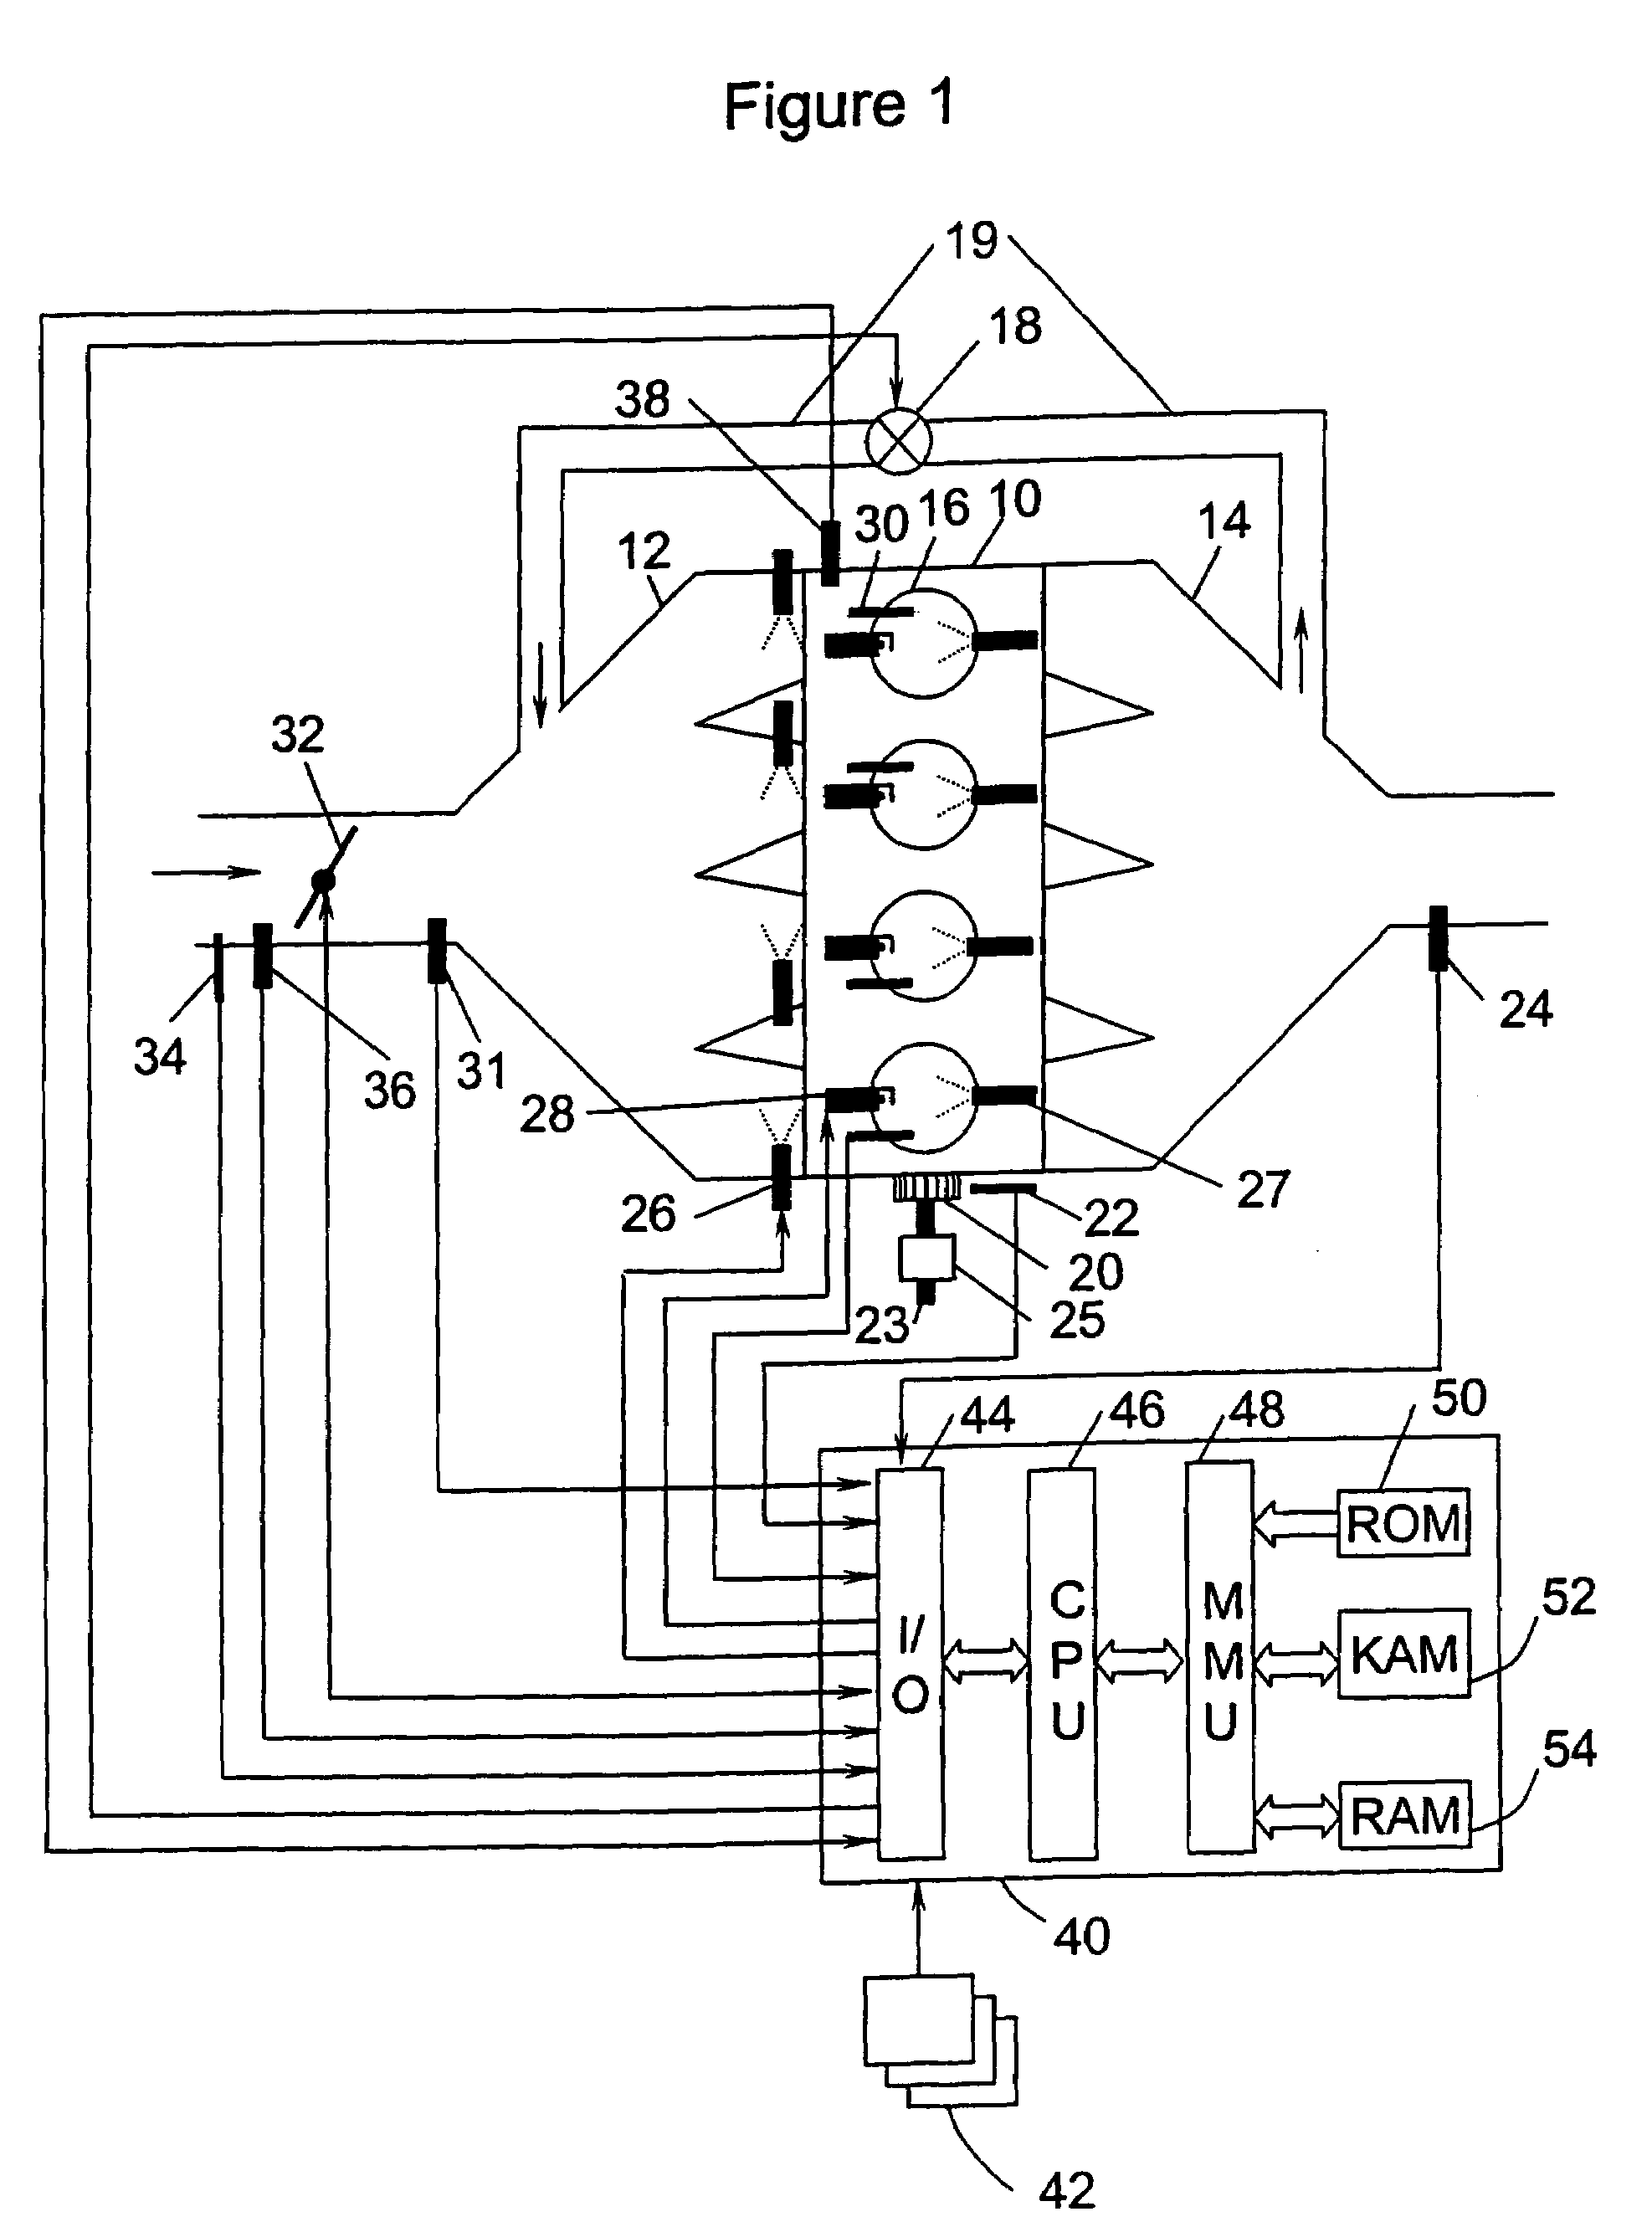 System and method to pre-ignition in an internal combustion engine